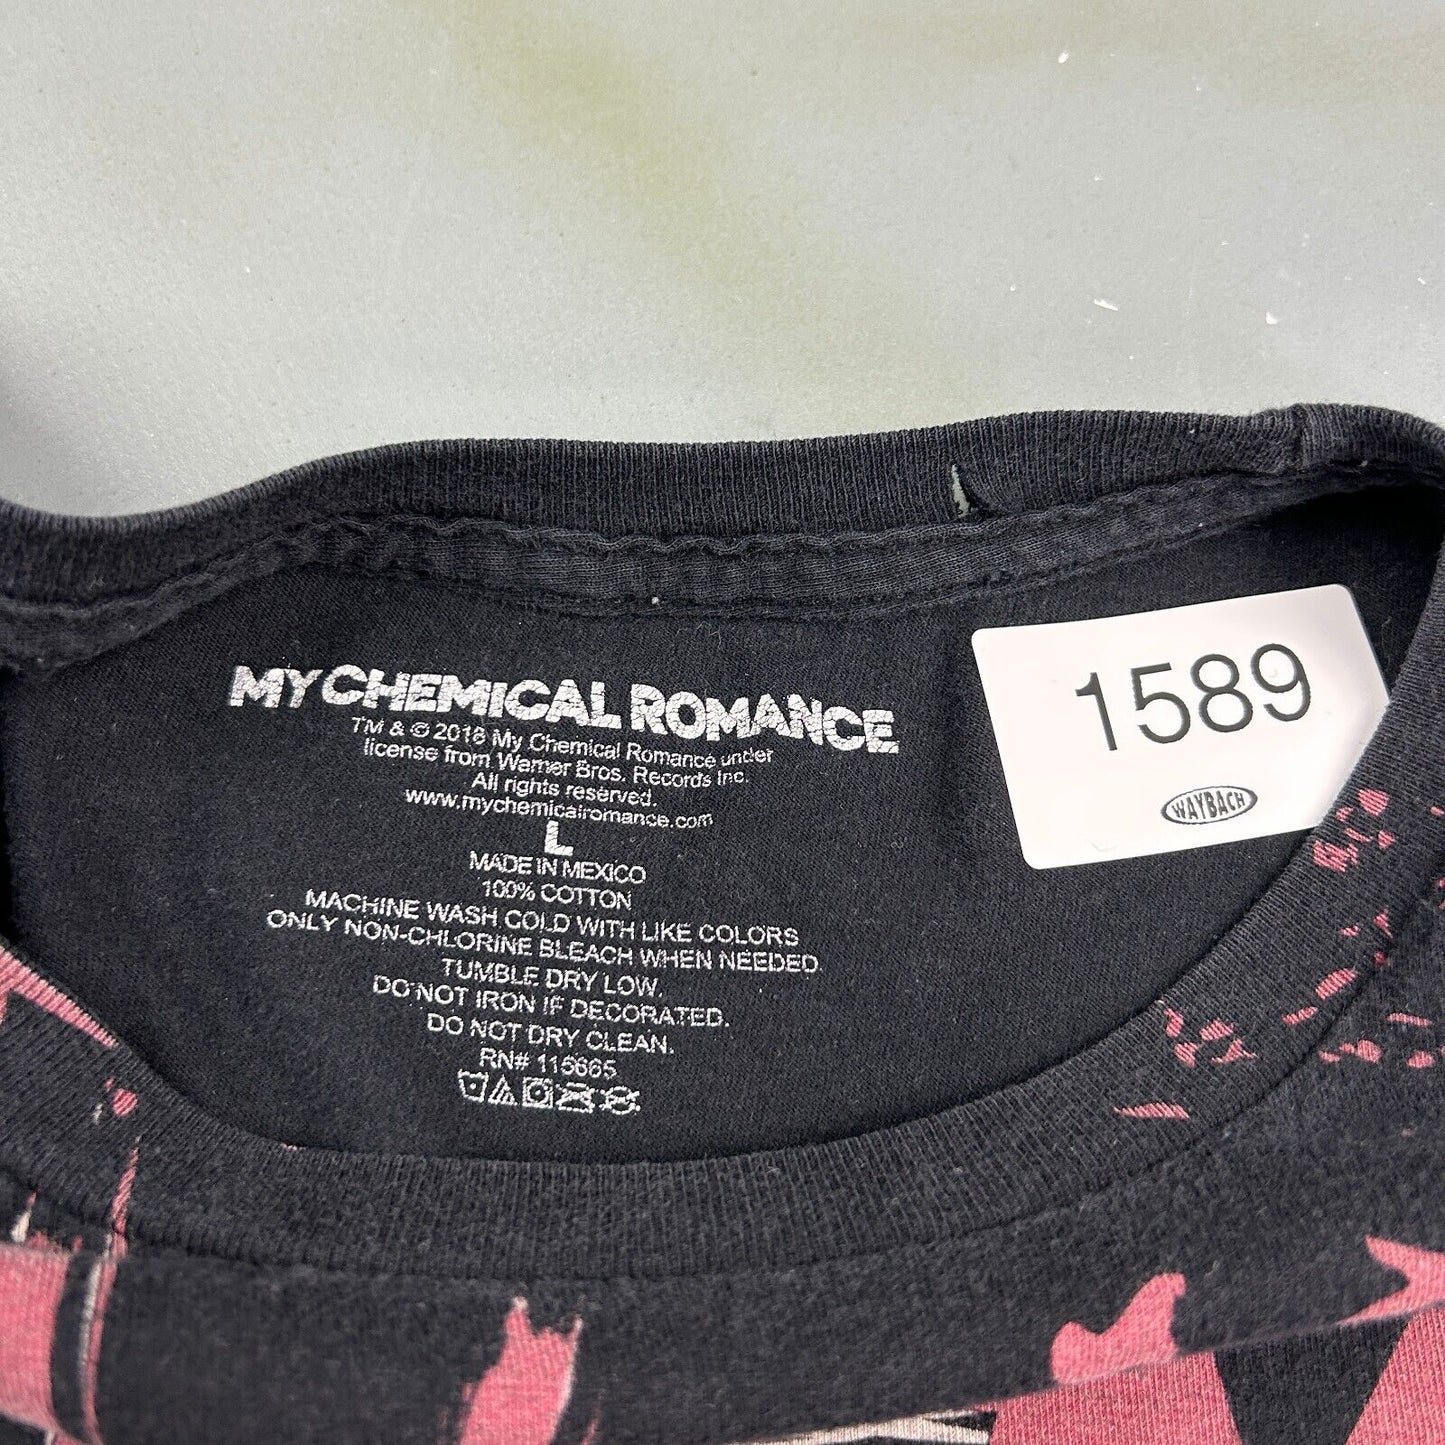 VINTAGE | My Chemical Romance All Over Print Black Band T-Shirt sz M Adult